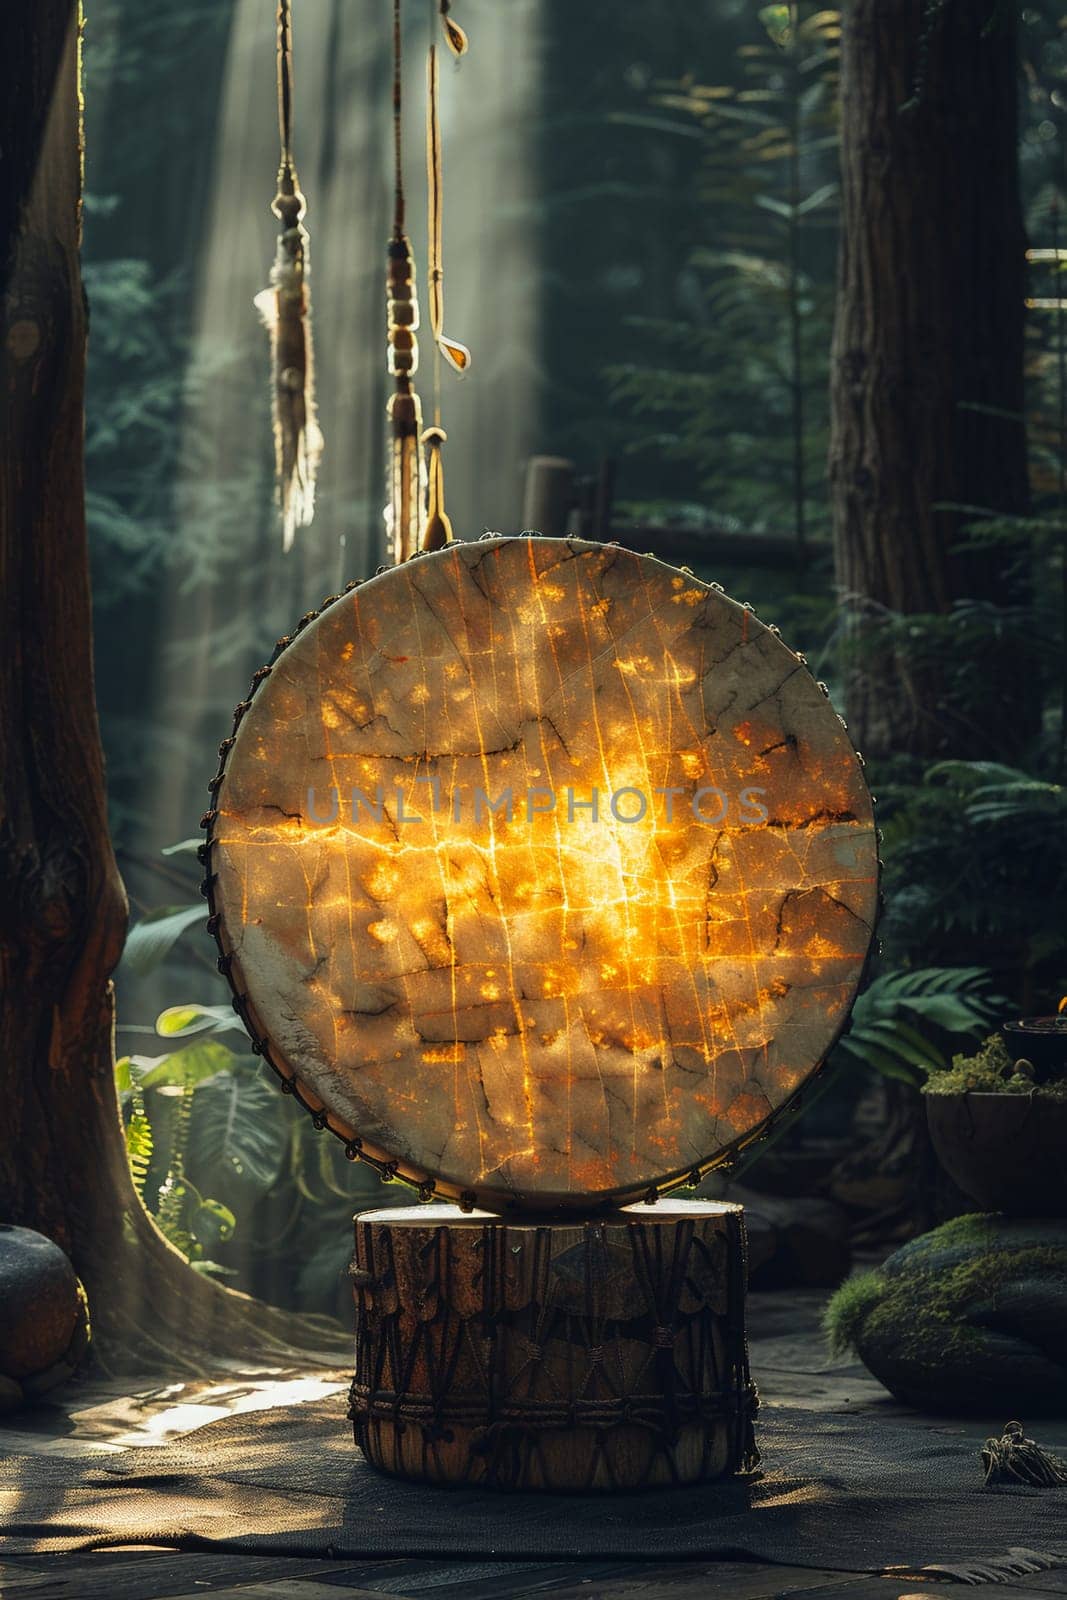 Shamanic Drum Ready for Spiritual Journeying The instrument blurs into the shadows by Benzoix